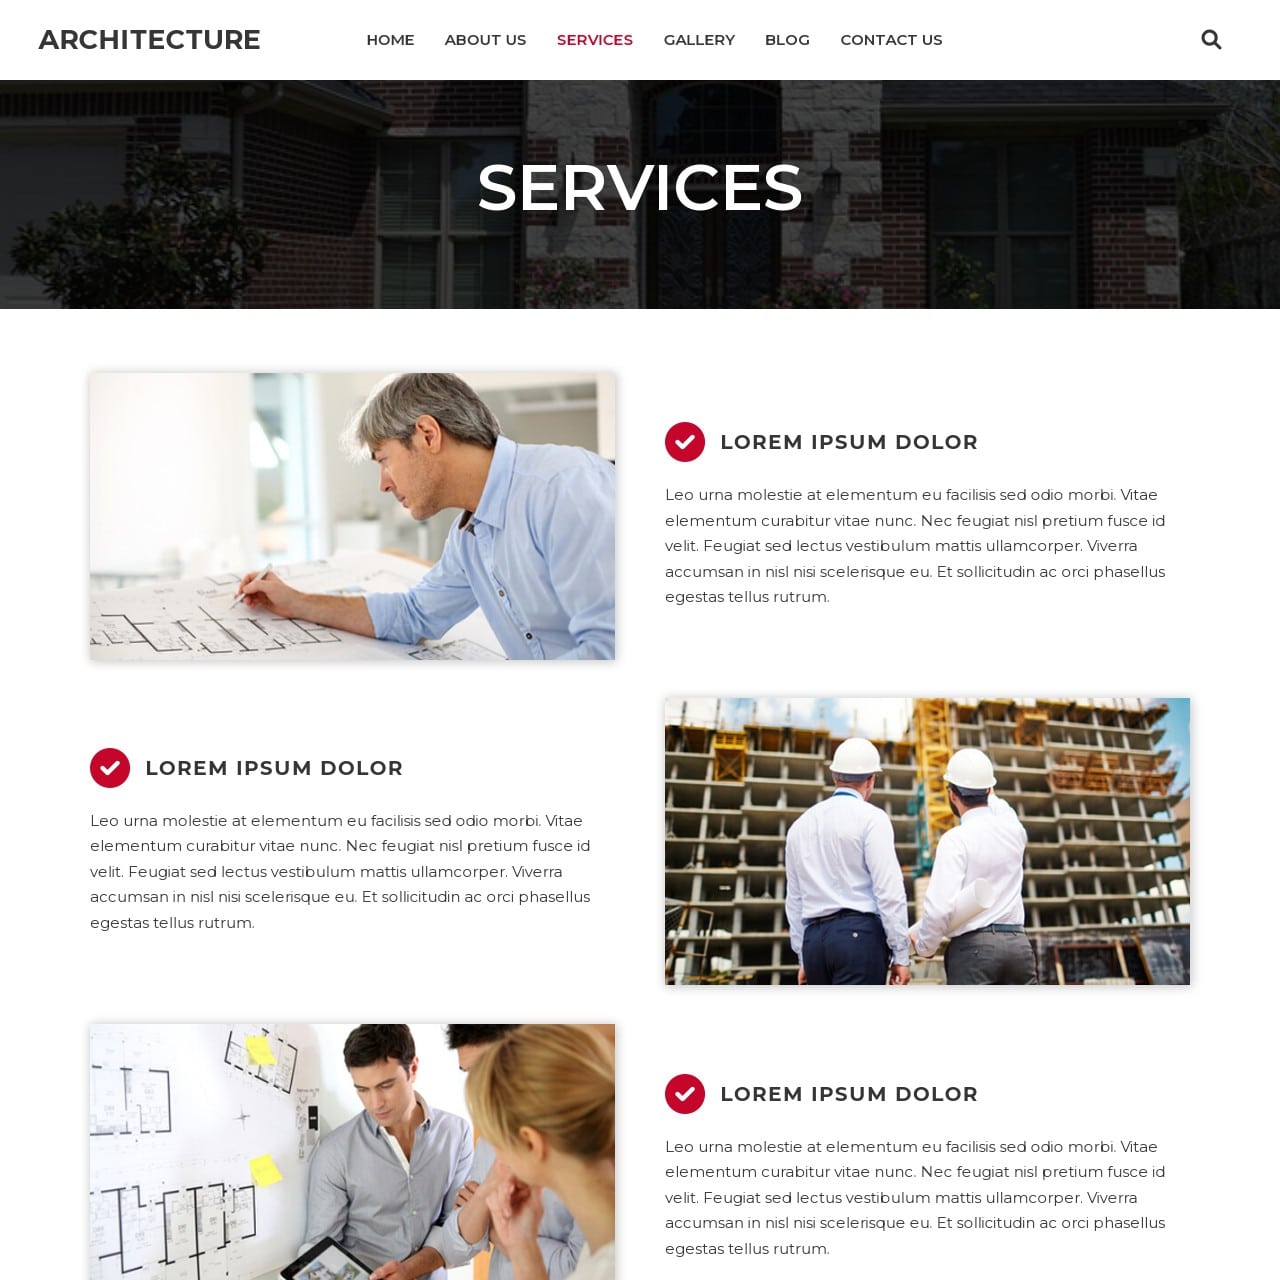 Architecture Template - Services Page